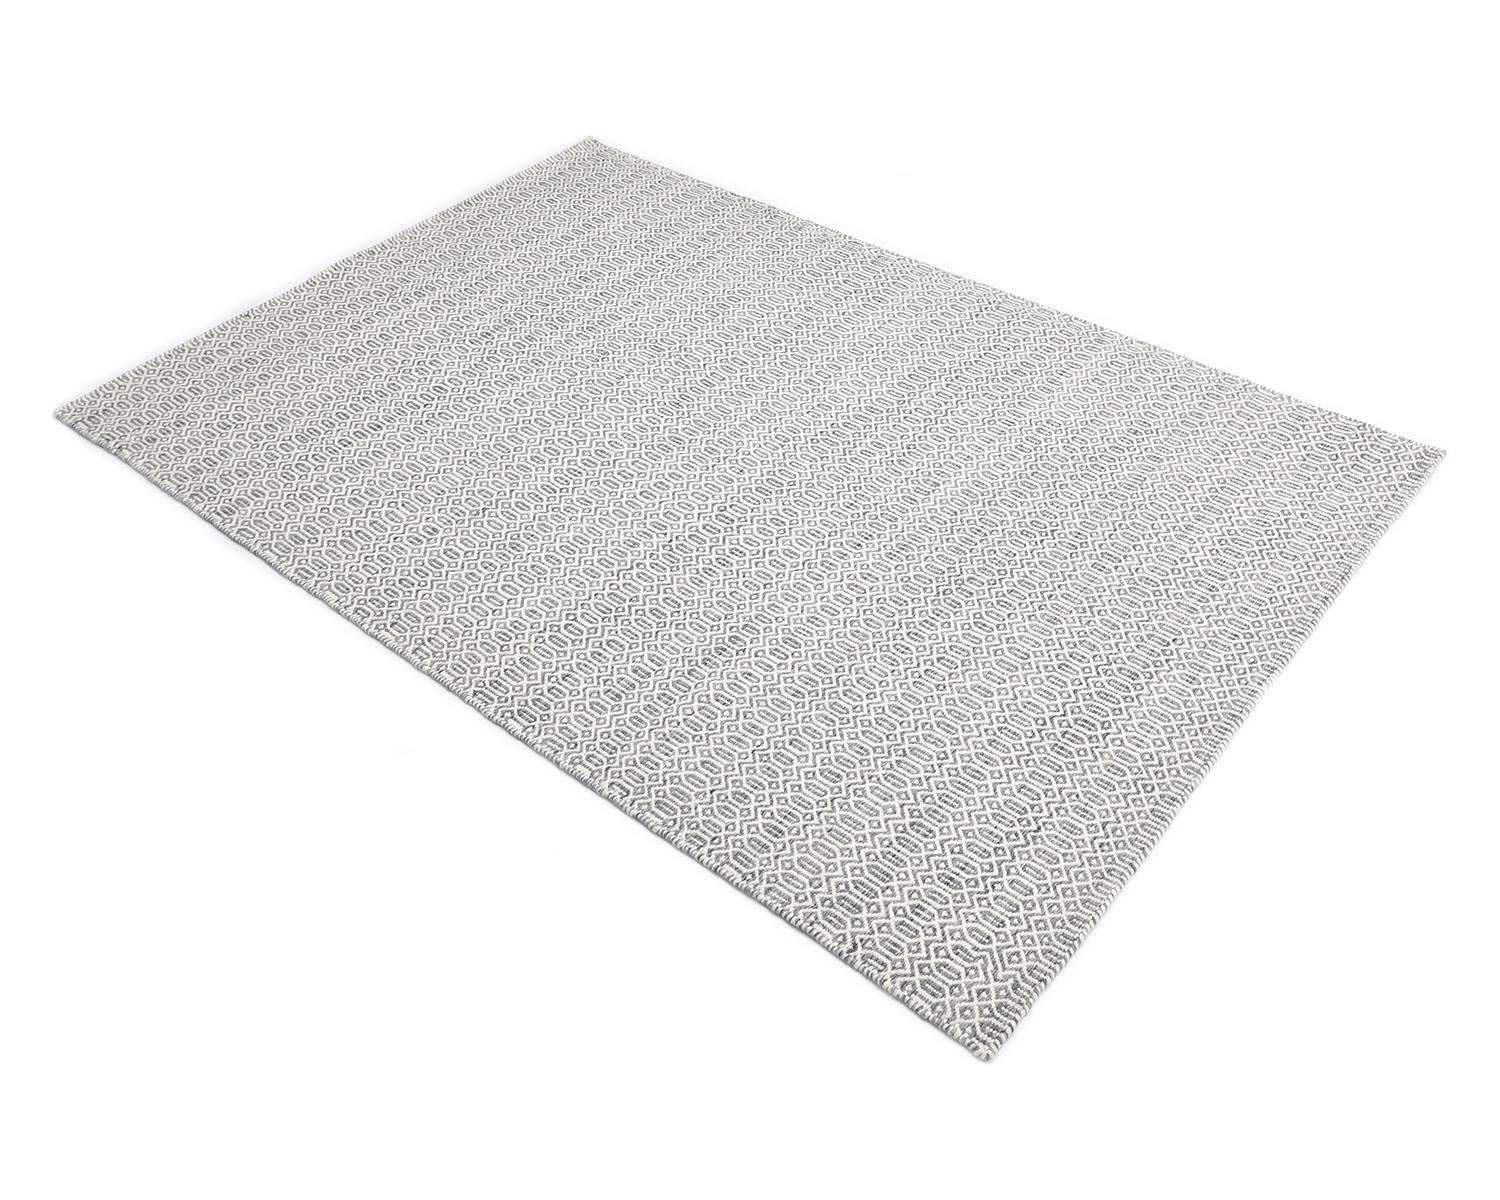 Solo Rugs Flatweave Geometric Hand Woven Gray Runner Area Rug For Sale 1